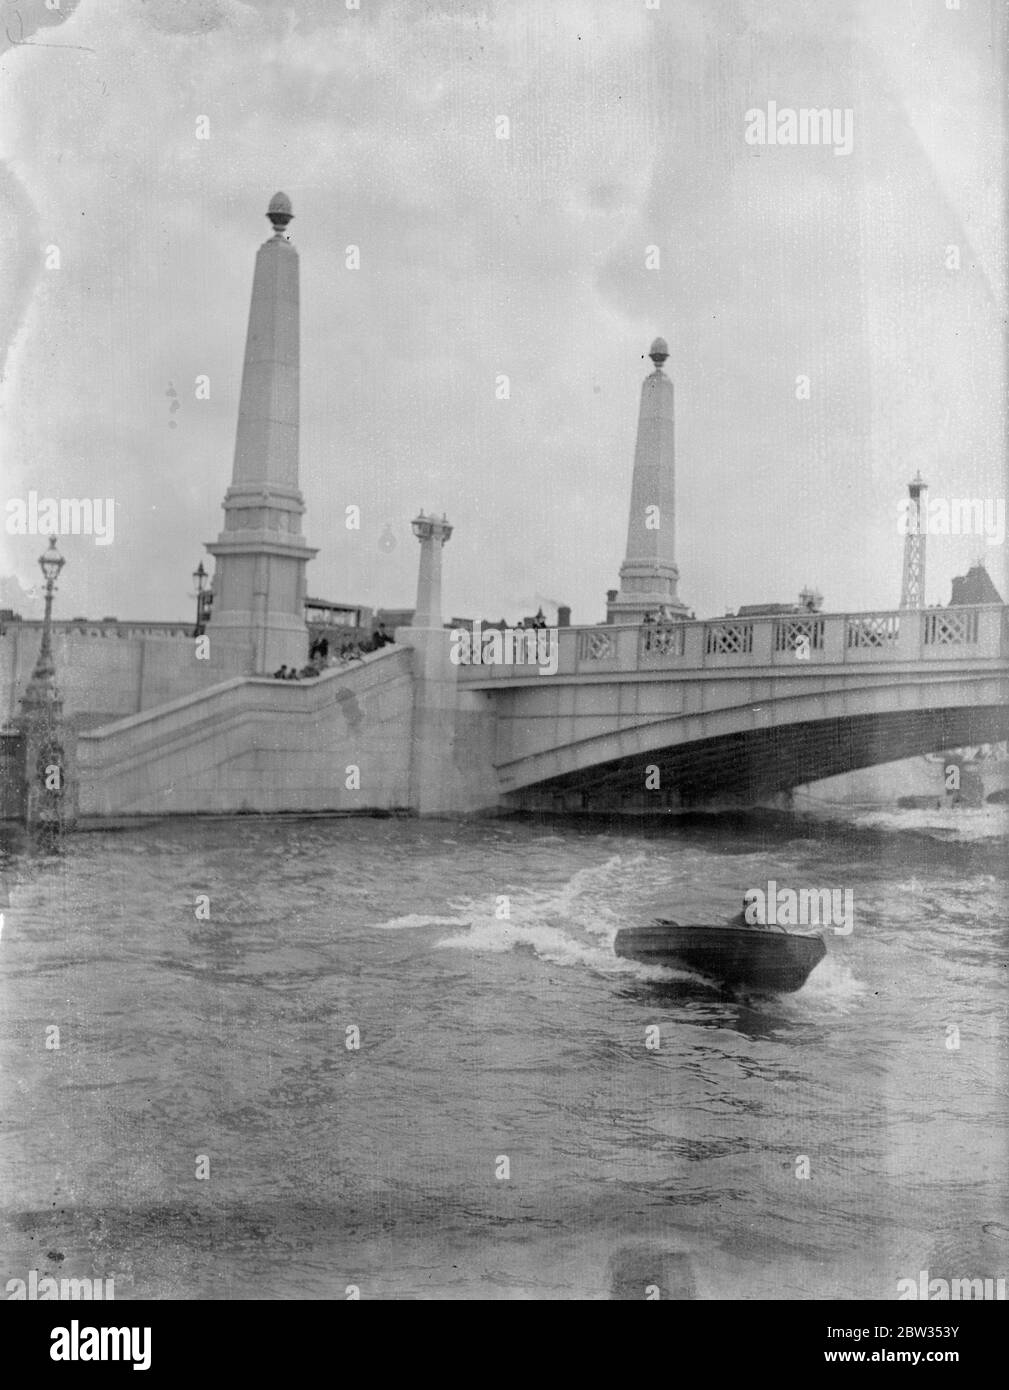 By speed boat to Antwerp . Mr R C Cole , the 21 year old London outboard motorboat enthusiast , in his outboard motorboat ' Miss Whitstable ' which is 13 feet long and has a 3 1/2 h.p engine , os attemptinga lone trip to Antwerp . He recently successfully completed completed the 550 miles journey from Westminster Bridge to Paris . Mr R C Cole at the wheel of his motorboat speeding in the Thames before the start of his trip . 4 August 1932 Stock Photo